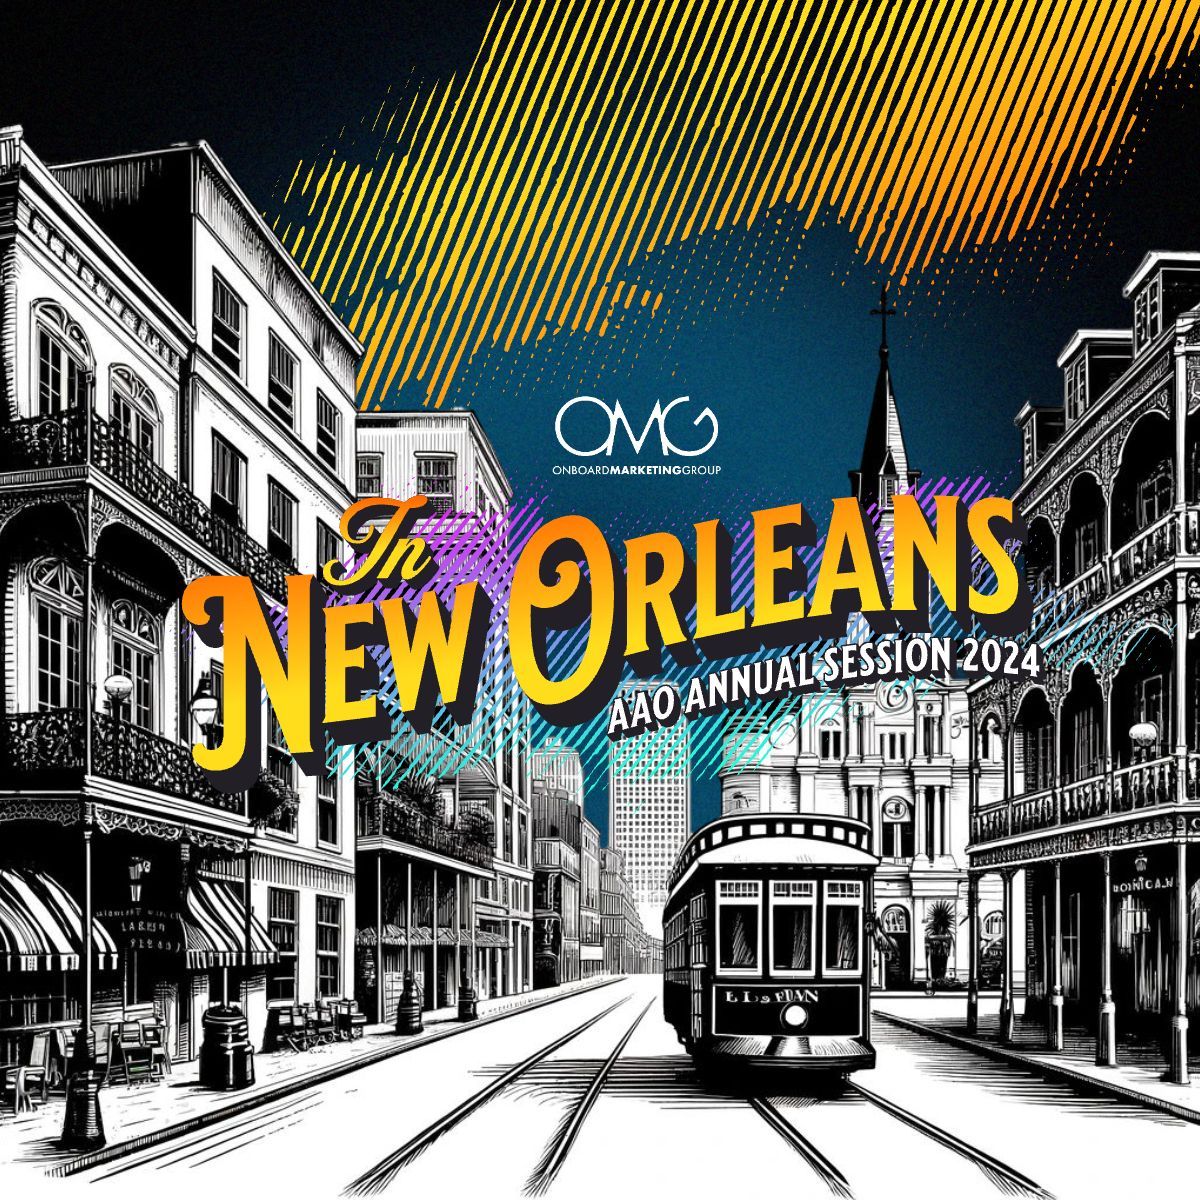 A poster for the new orleans and annual session 2024